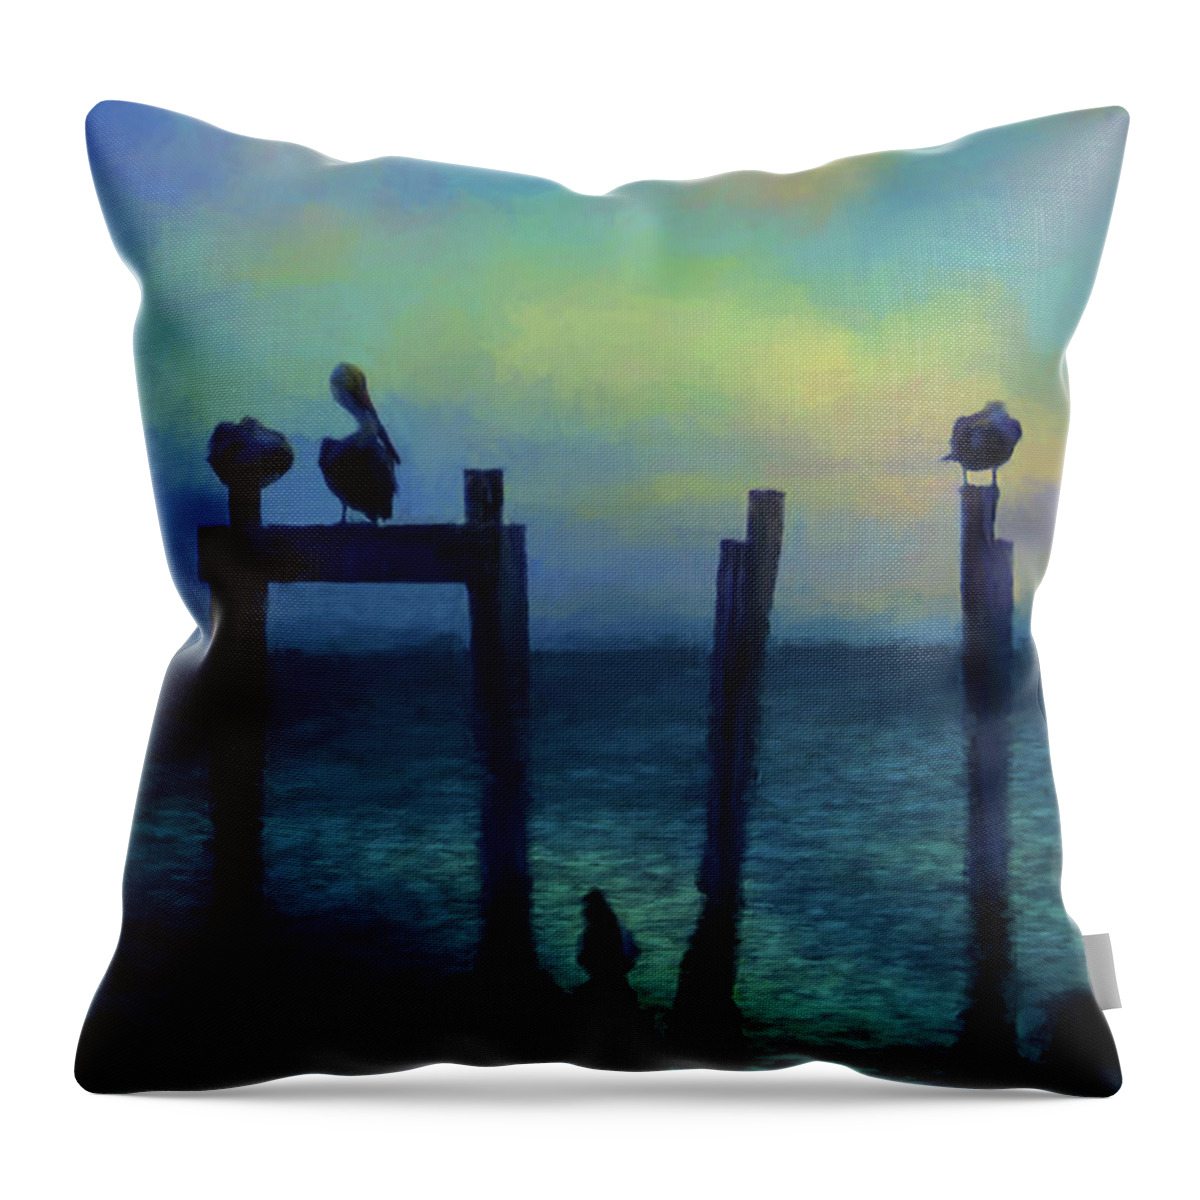 Pelicans Throw Pillow featuring the photograph Pelicans At Sunset by Jan Amiss Photography